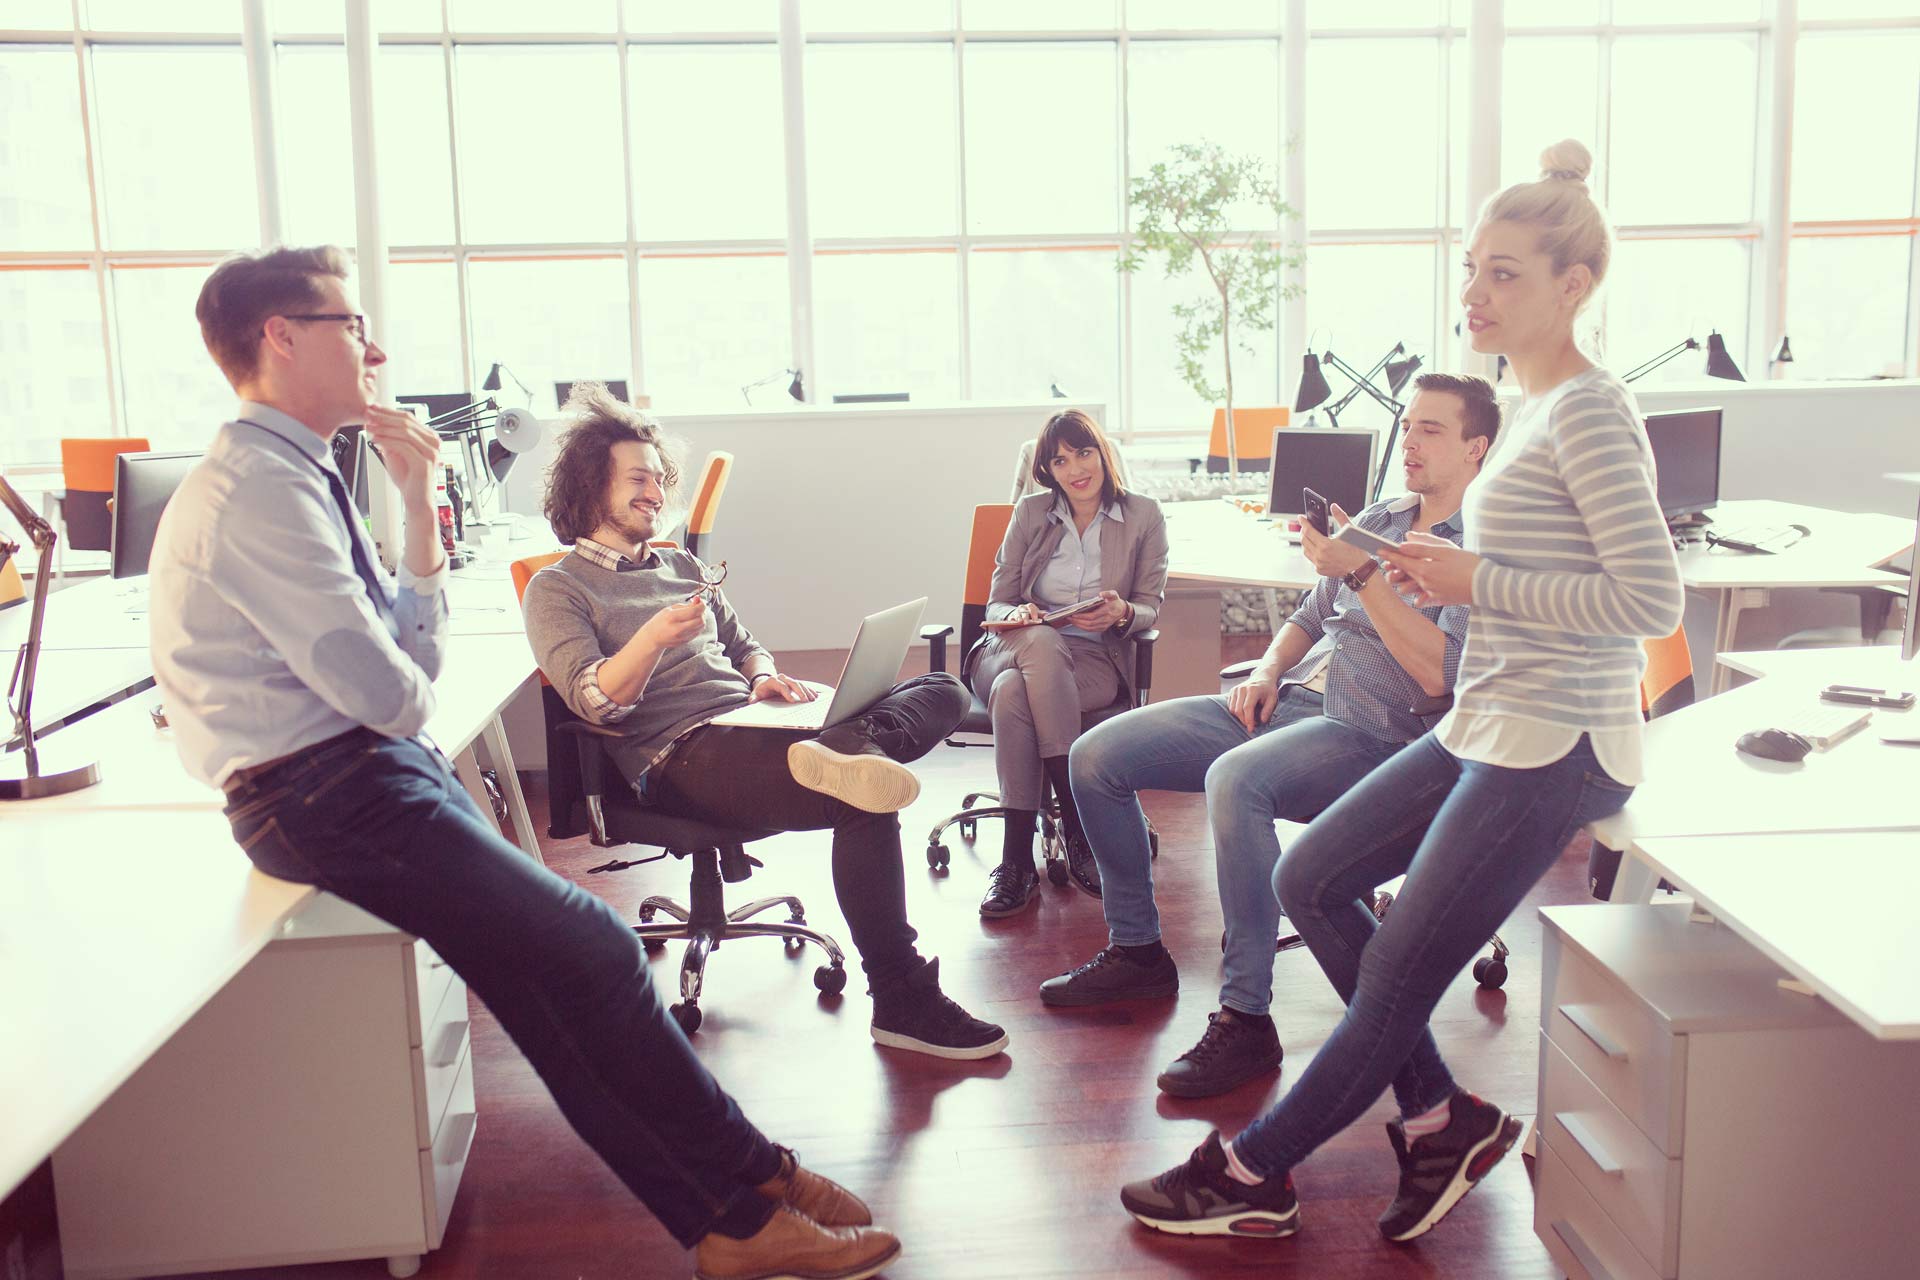 5 Team Building Activities Your Team Would Actually Love